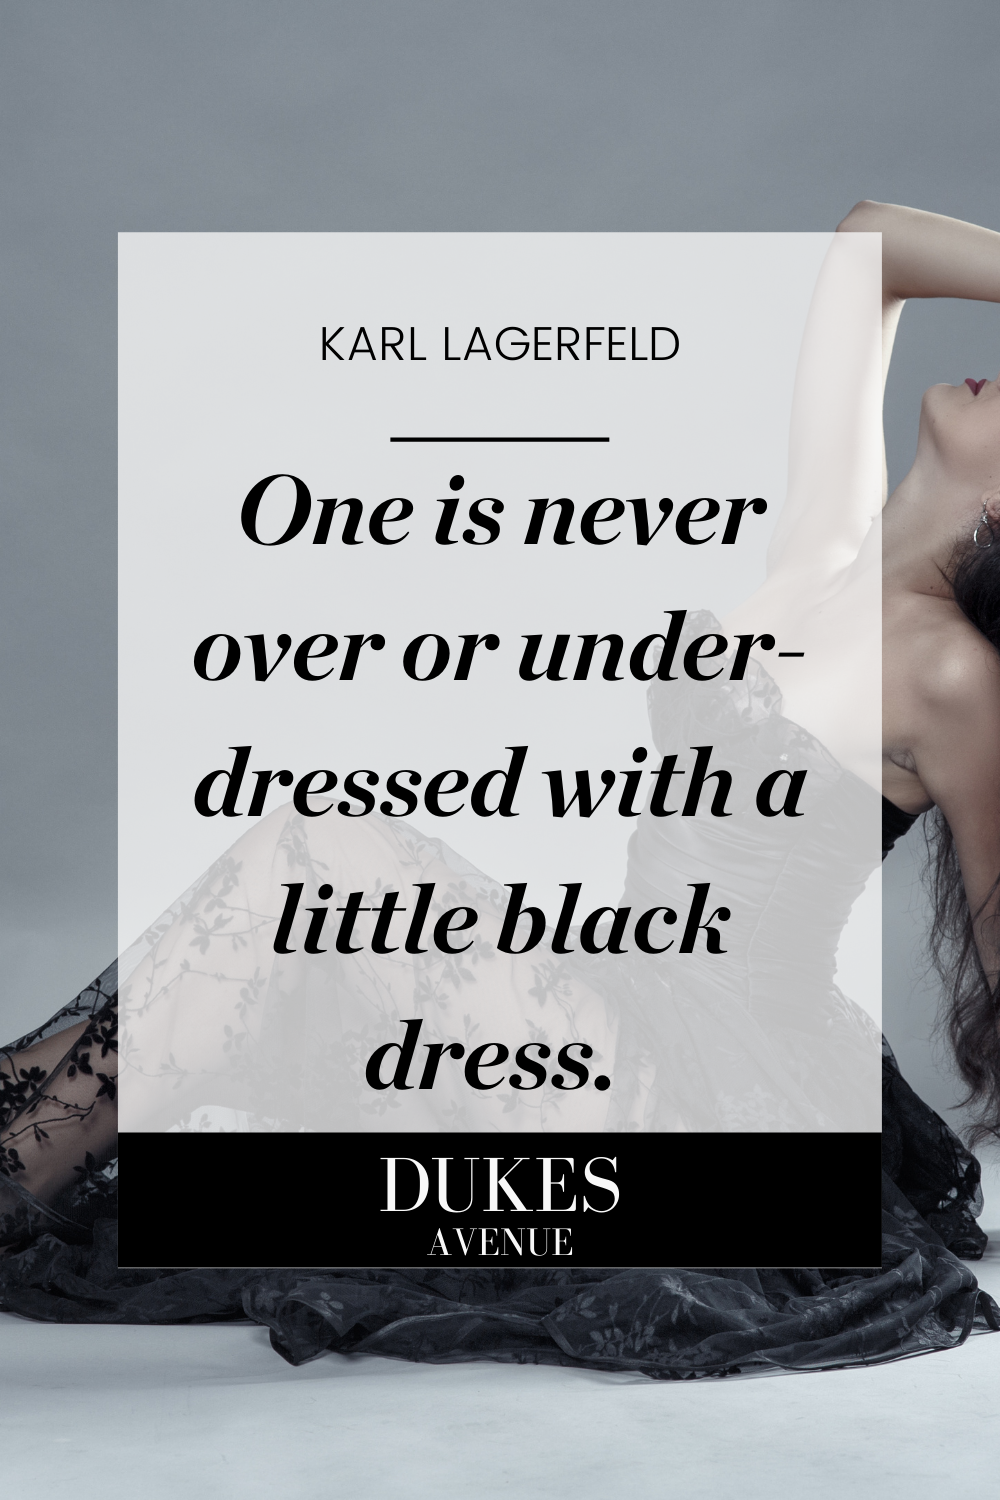 Woman posing in black lace dress against a grey backdrop with a Karl Lagerfeld quote on little black dresses as text overlay.